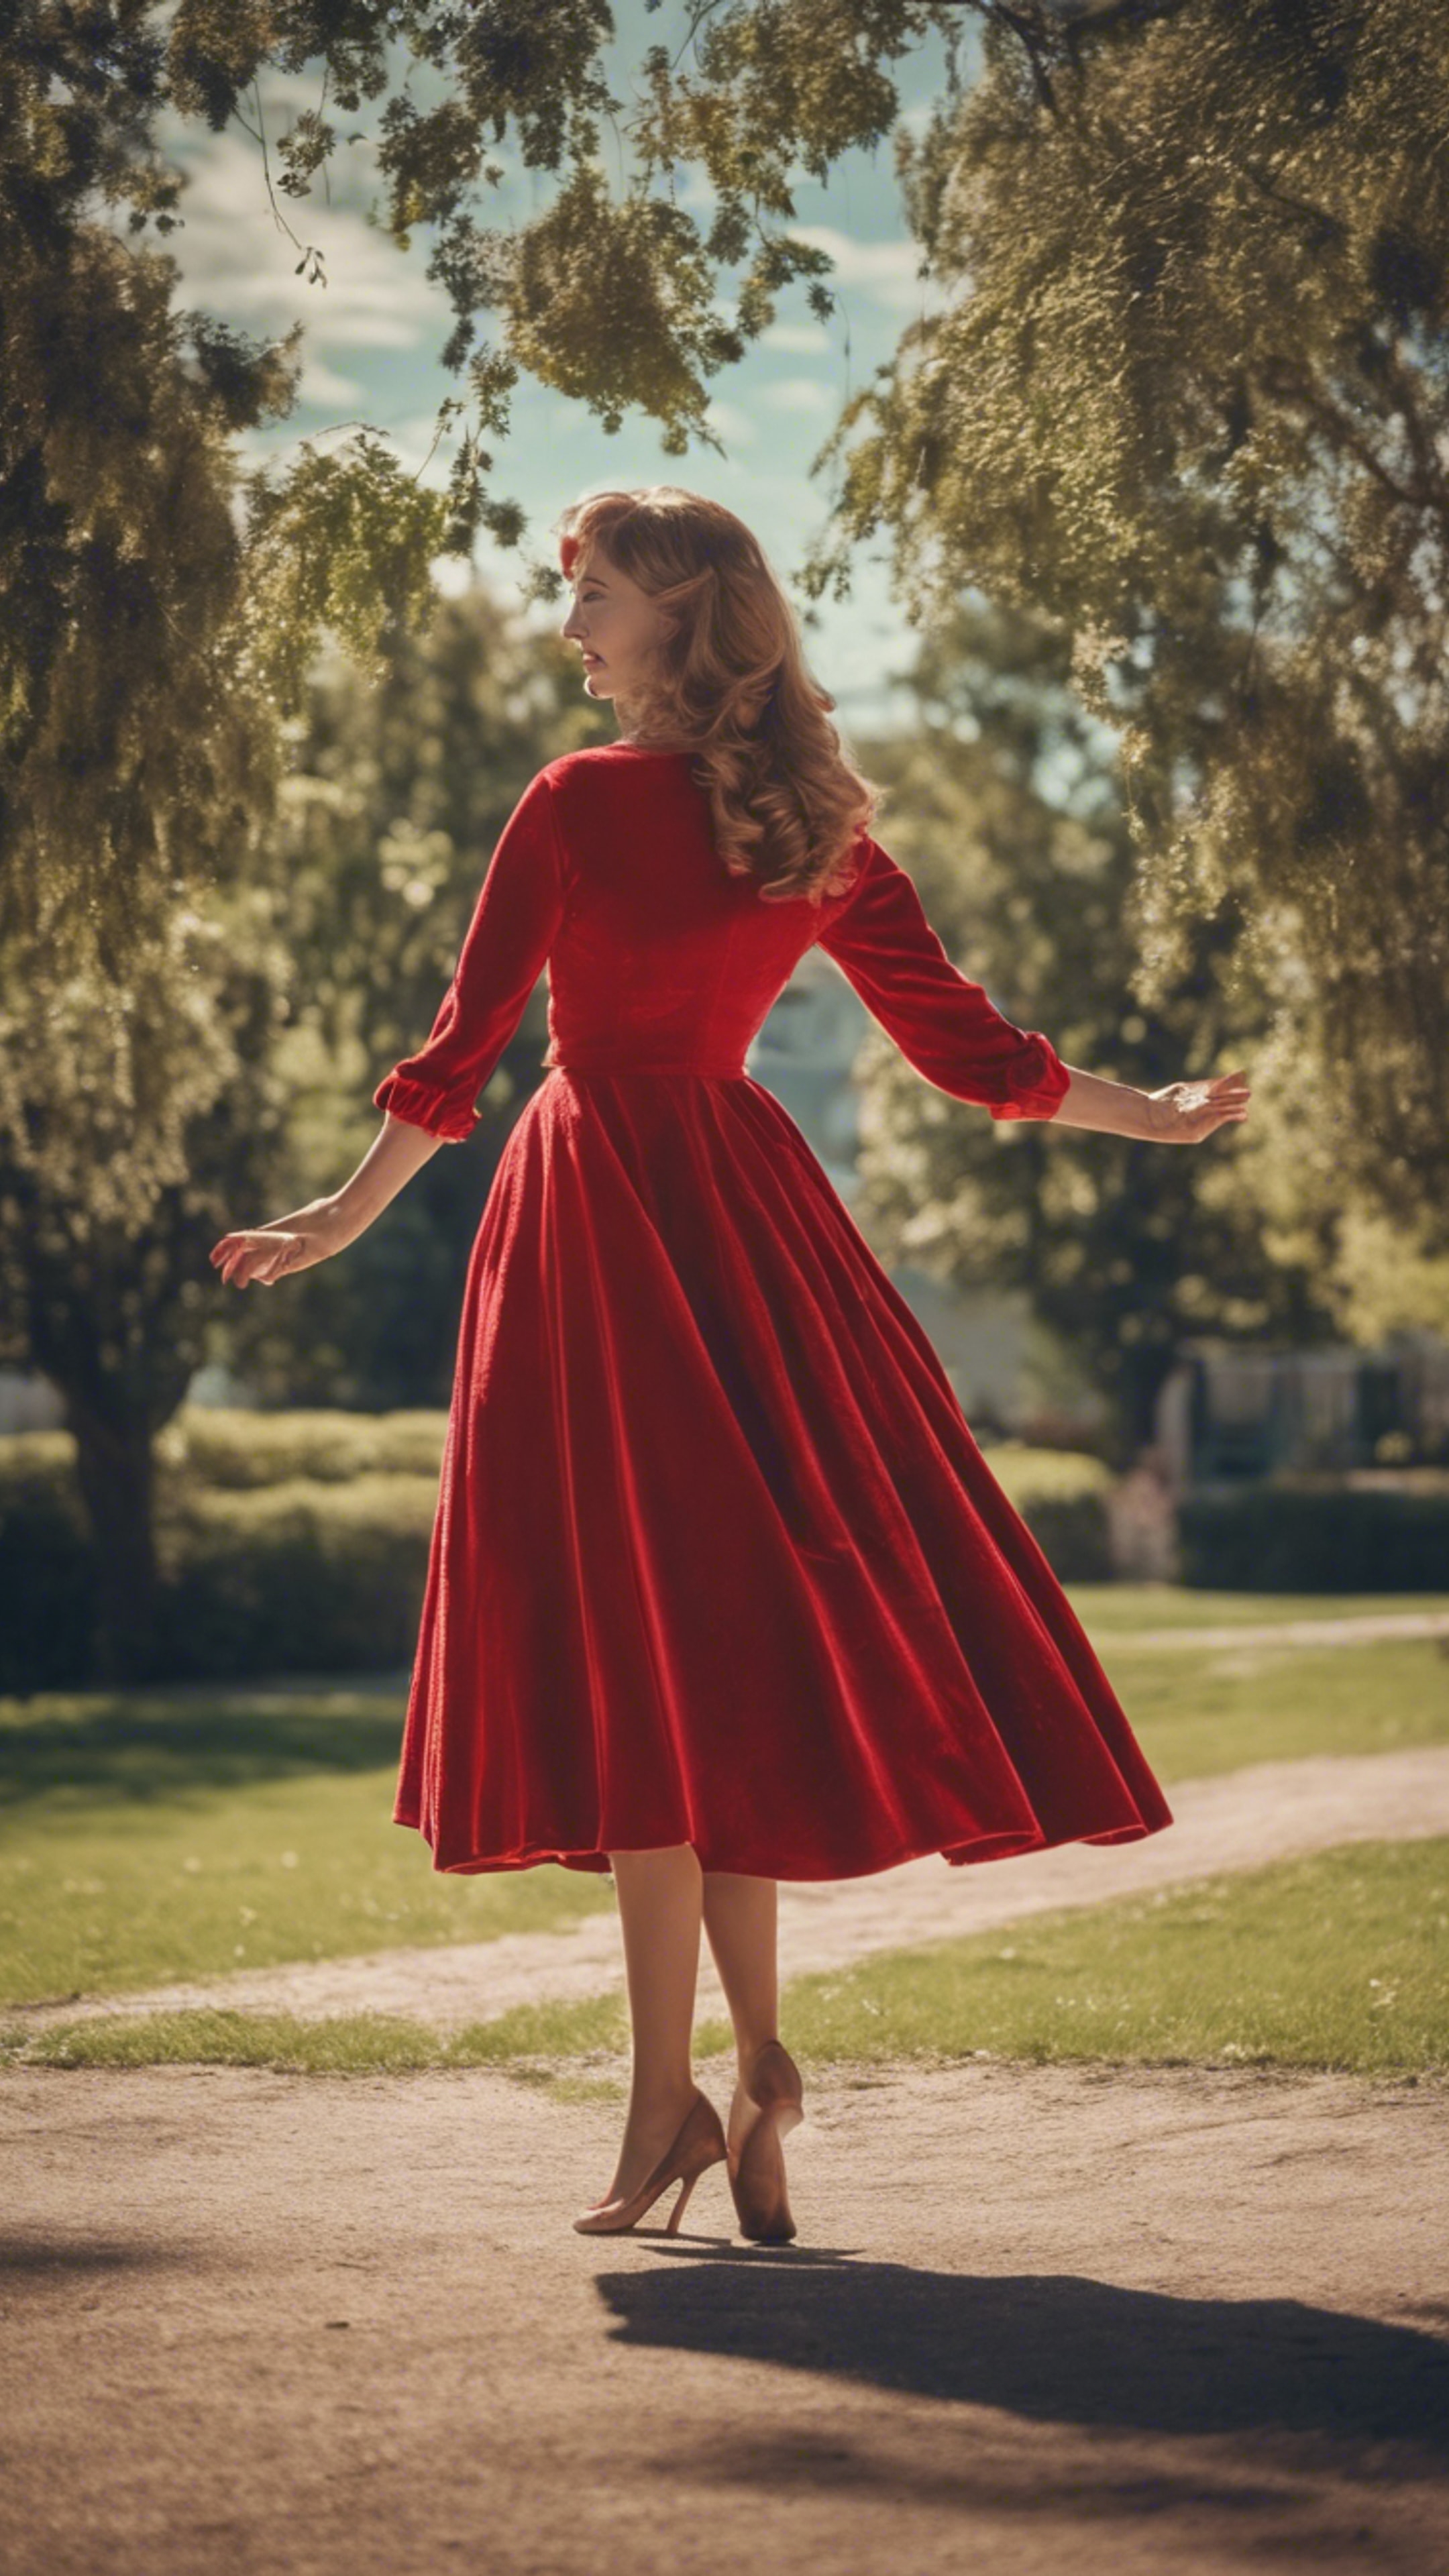 A red velvet swing dress from the 1950s, dancing in the wind on a sunny day. Wallpaper[698c6881b2664684a2ce]